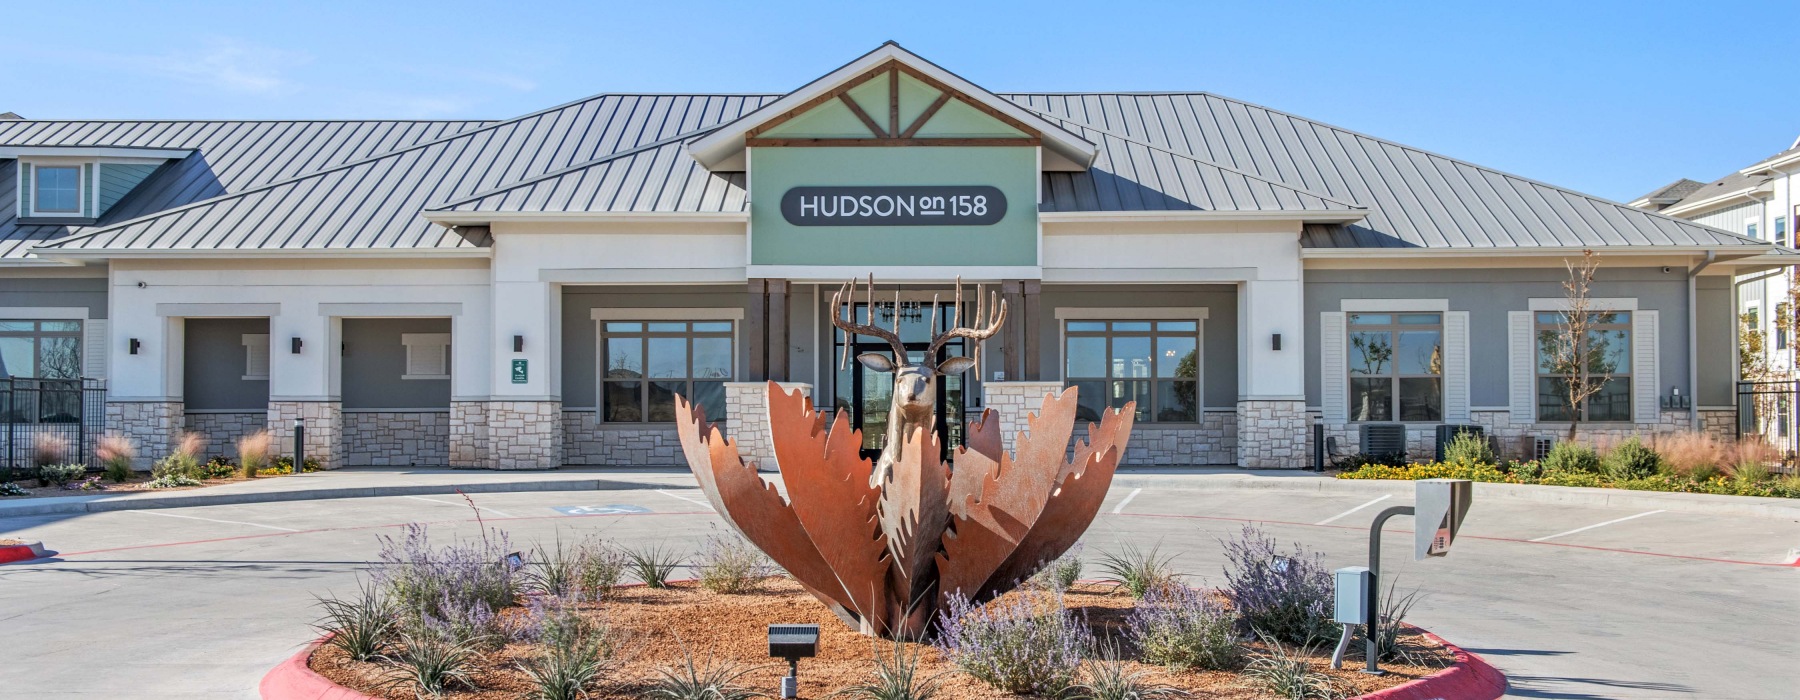 The entrance to our apartments in Midland, TX, featuring a drop off area, a metal sculpture, and a sign reading "The Hudson".